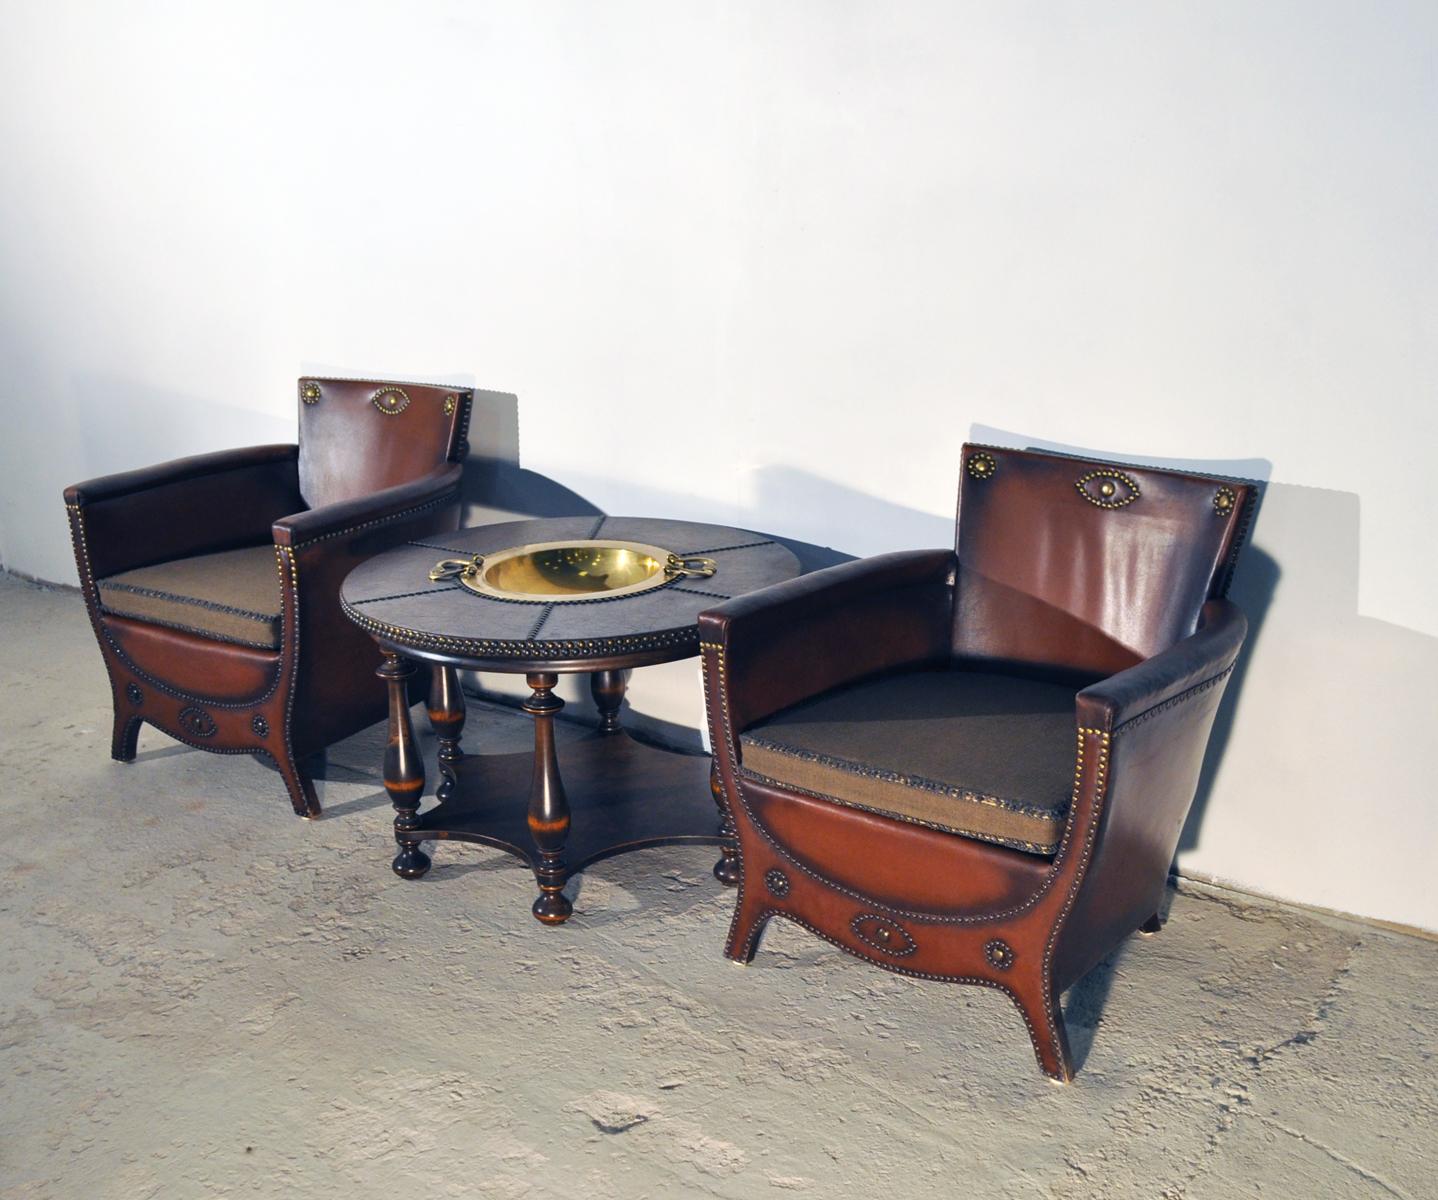 Otto Schulz lounge chairs with original leather and brass nailhead. Round low table with patinated leather top and brass nails and centre brass bowl. Designed in the 1930s and manufactured by Boet in Gothenburg, Sweden.
Patinated with signs of wear